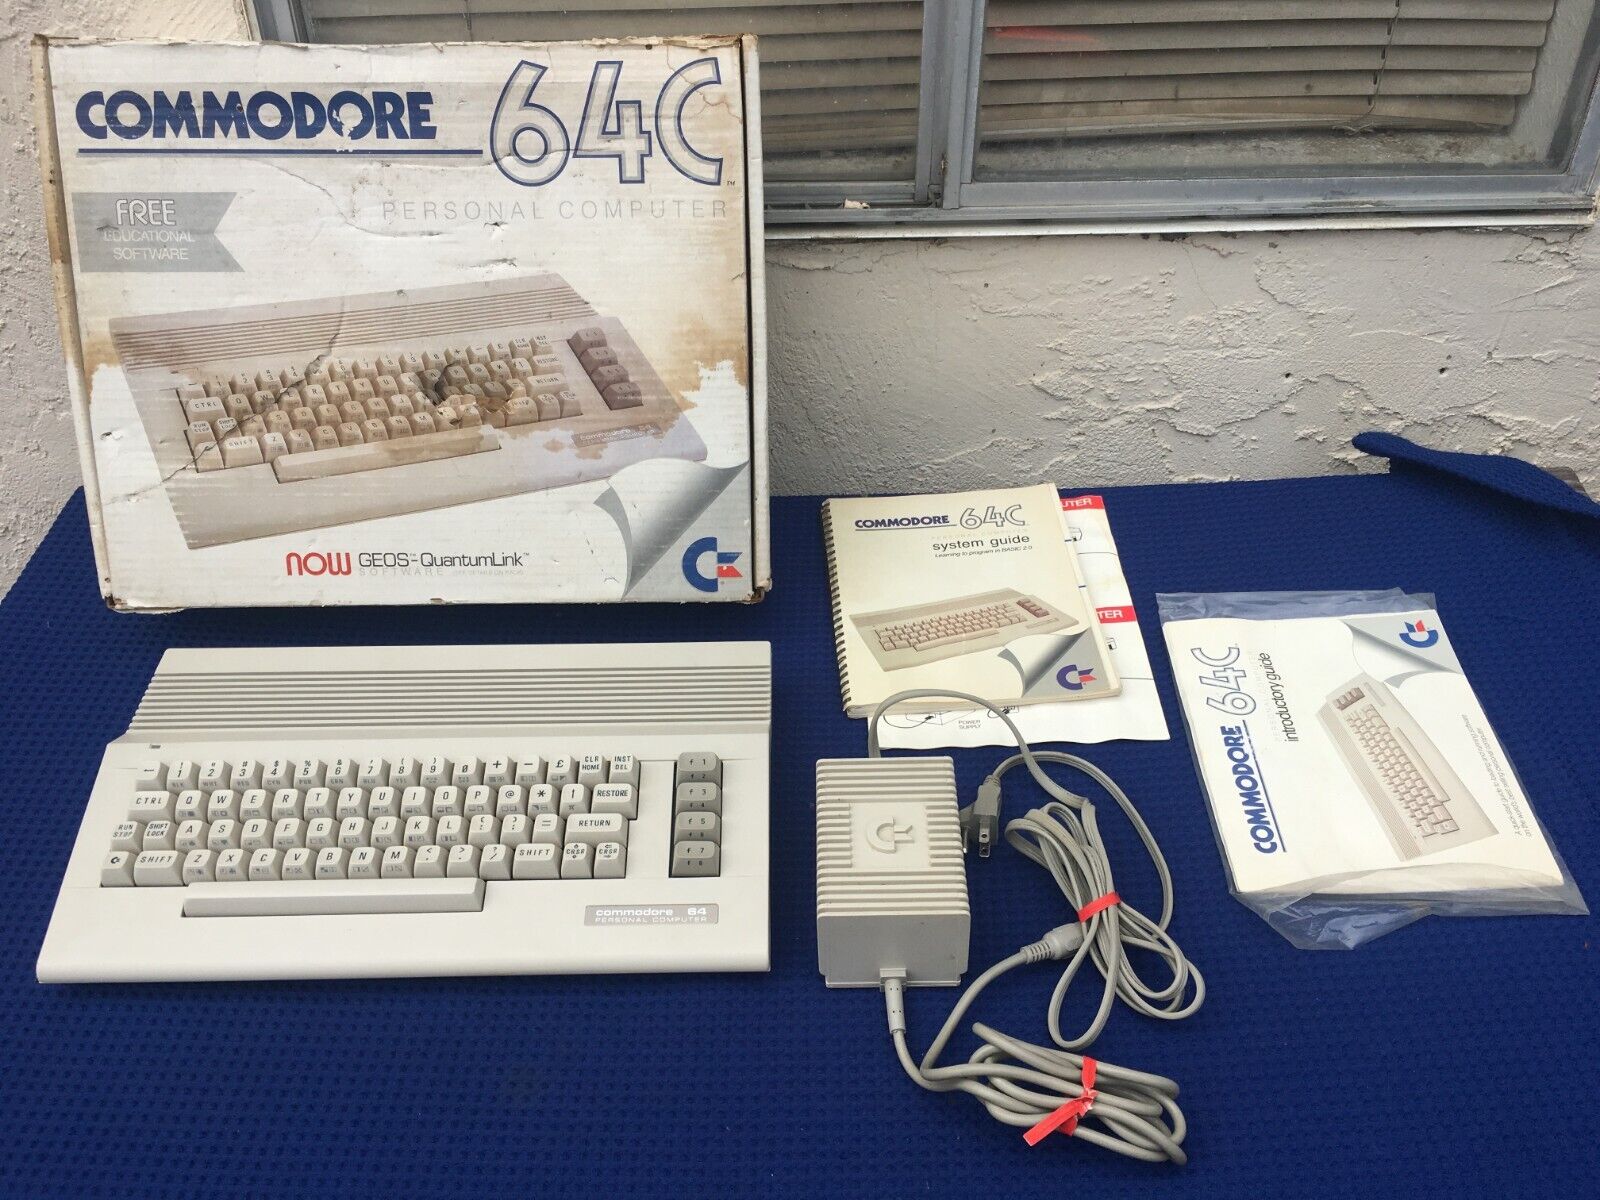 Commodore 64 Computer In Original Box With Power Supply Tested Working Nice